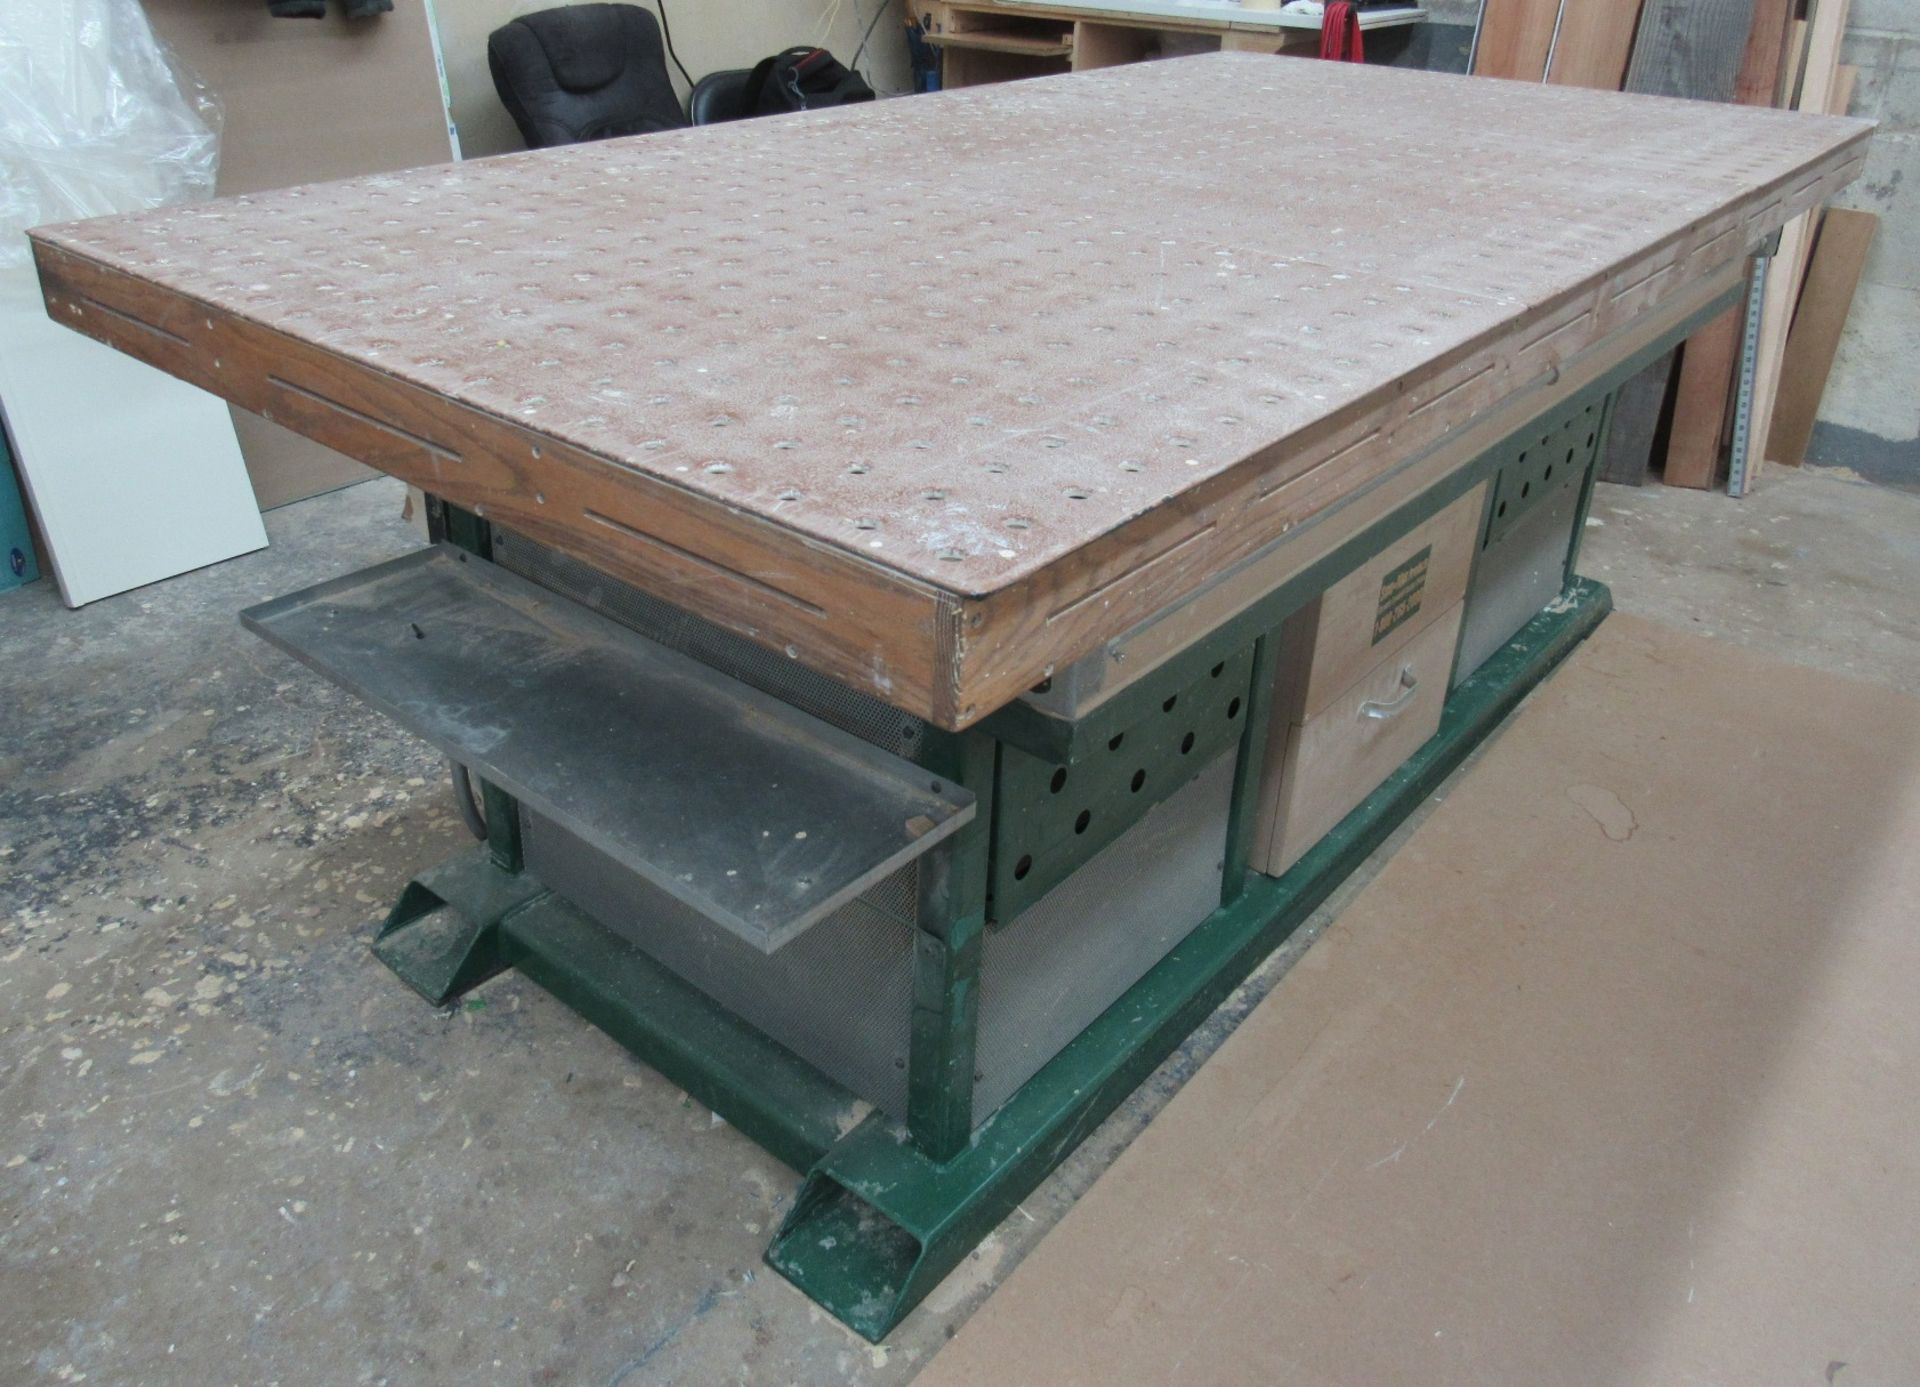 Sand Pro Mod.DL9648 Downdraft Sanding Station - New 2008, 96" x 48" Table Size, 36" Table Height, ( - Image 4 of 5